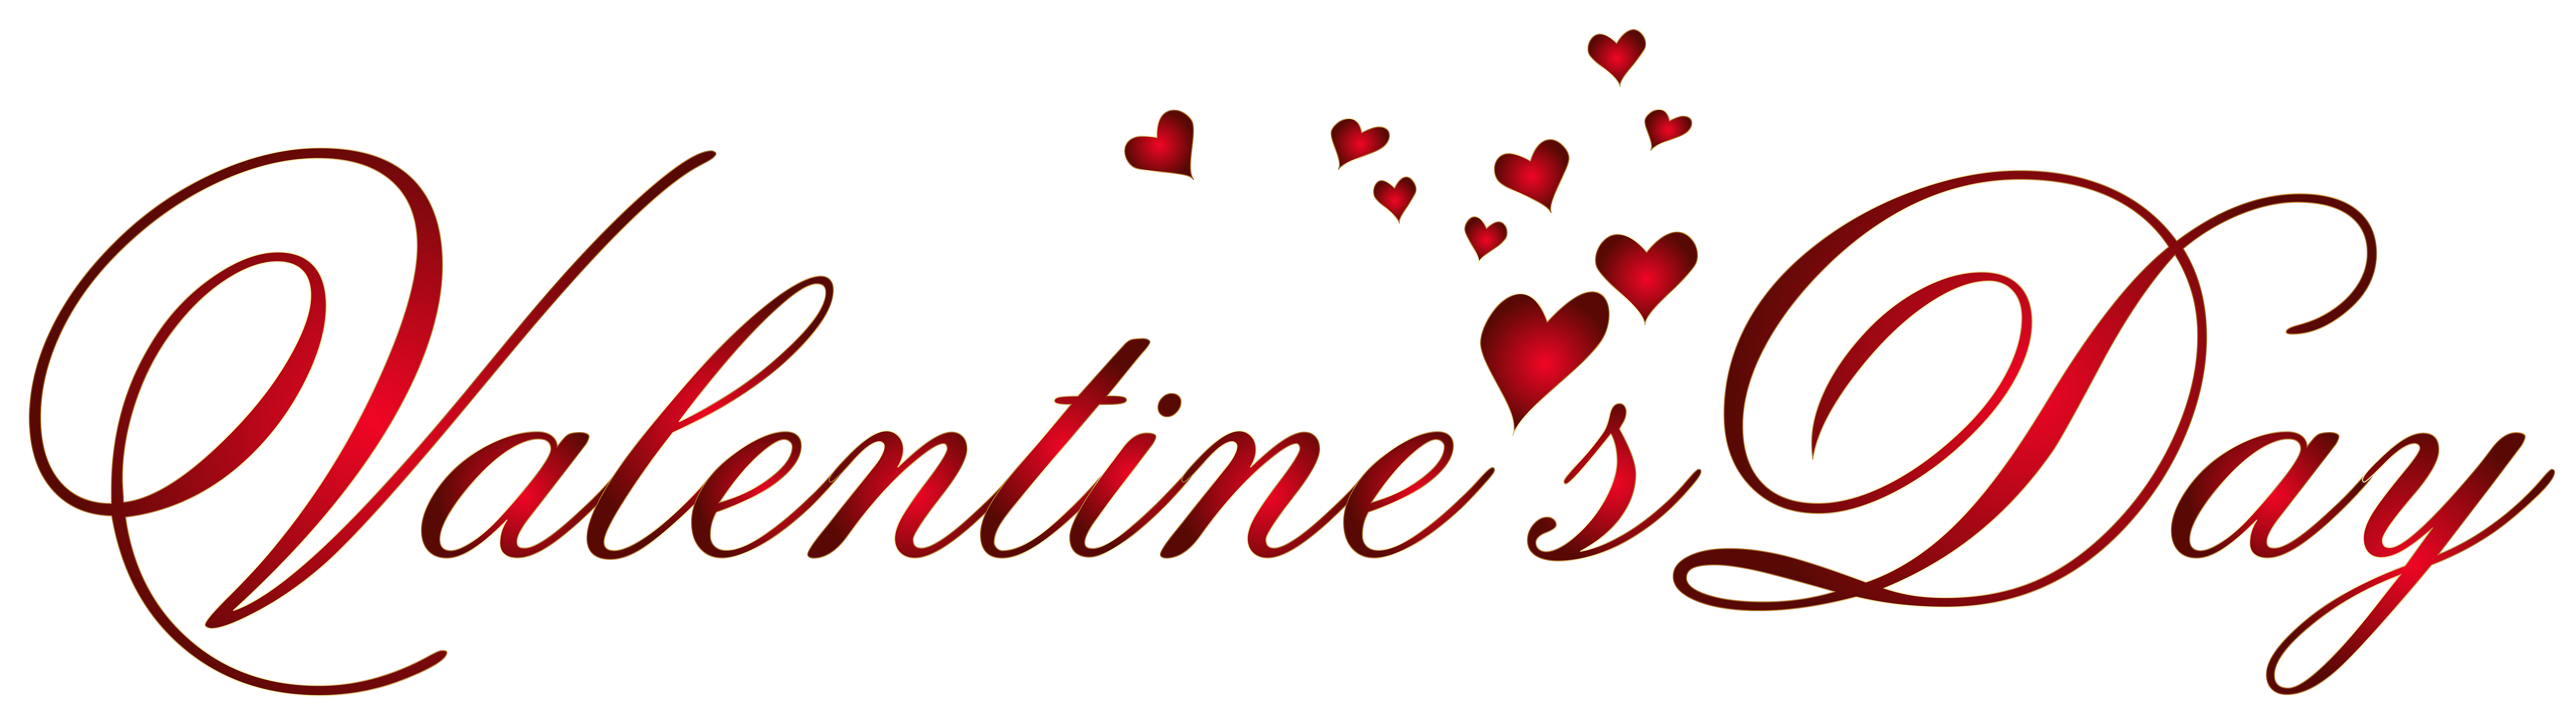 Valentine S Day Transparent Png Clip Art Image Gallery Yopriceville High Quality Images And Transparent Png Free Clipart